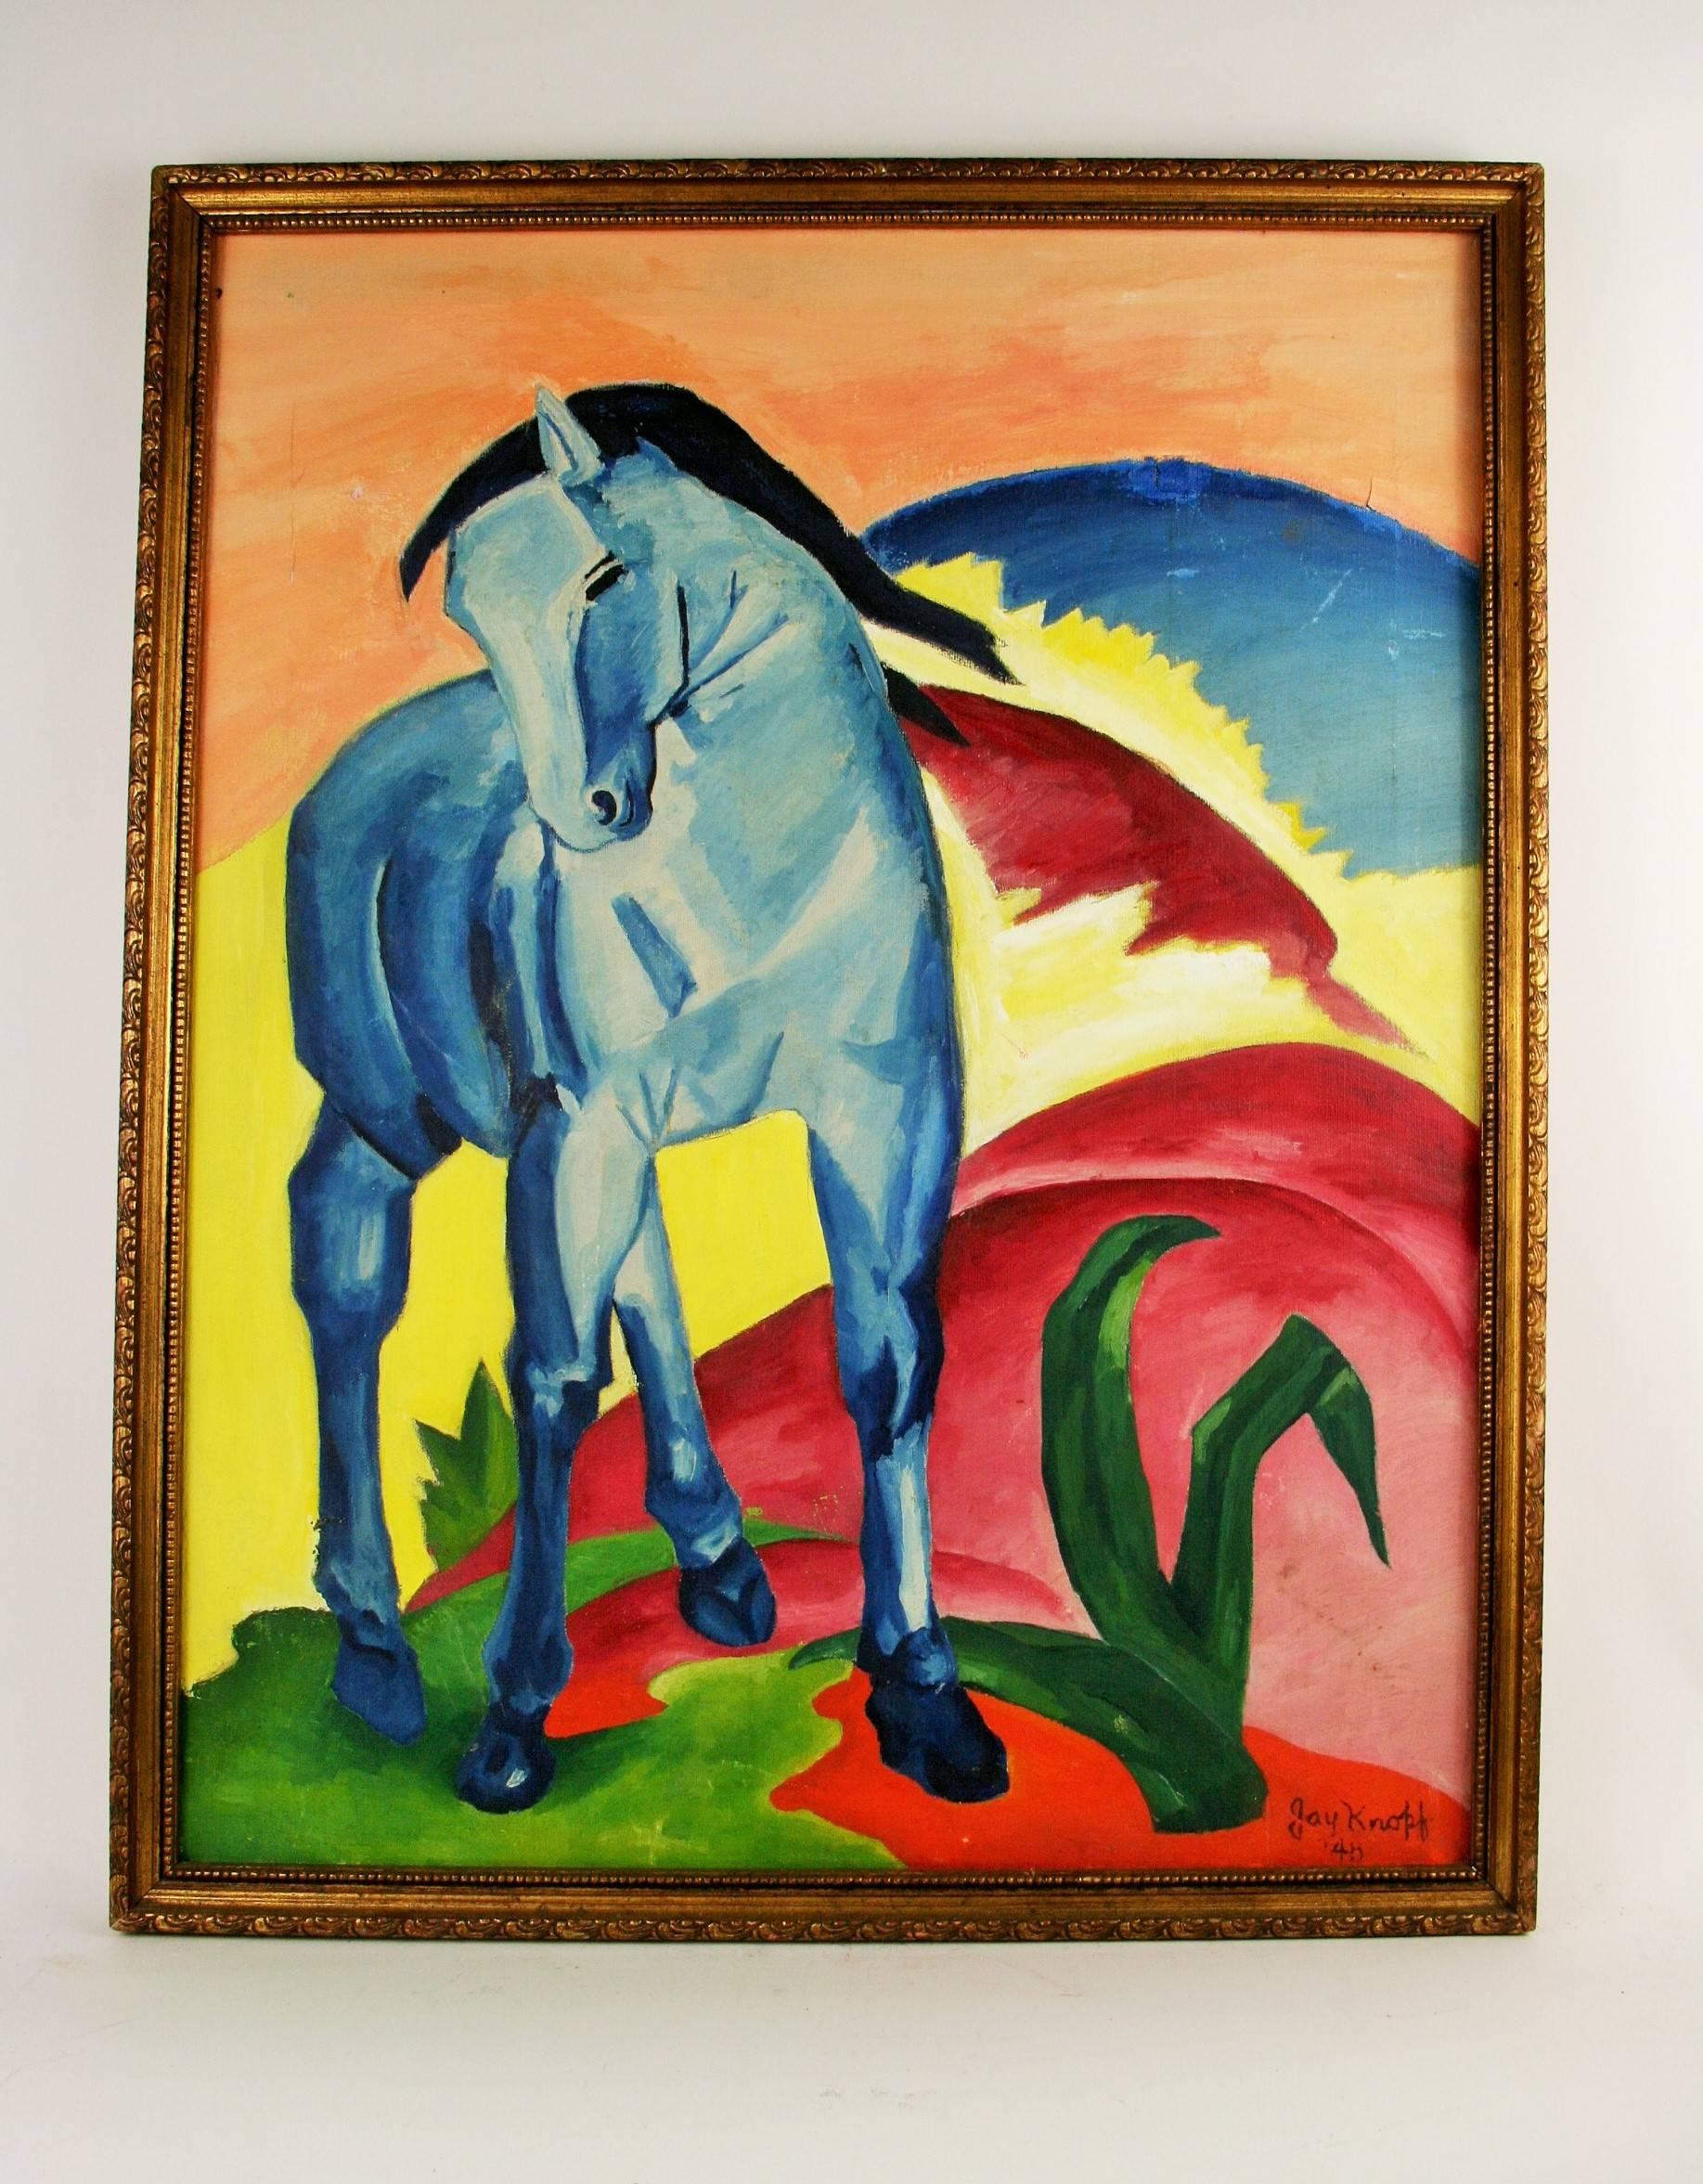 Blue Horse by J. Knopf - Painting by Jay Knopf